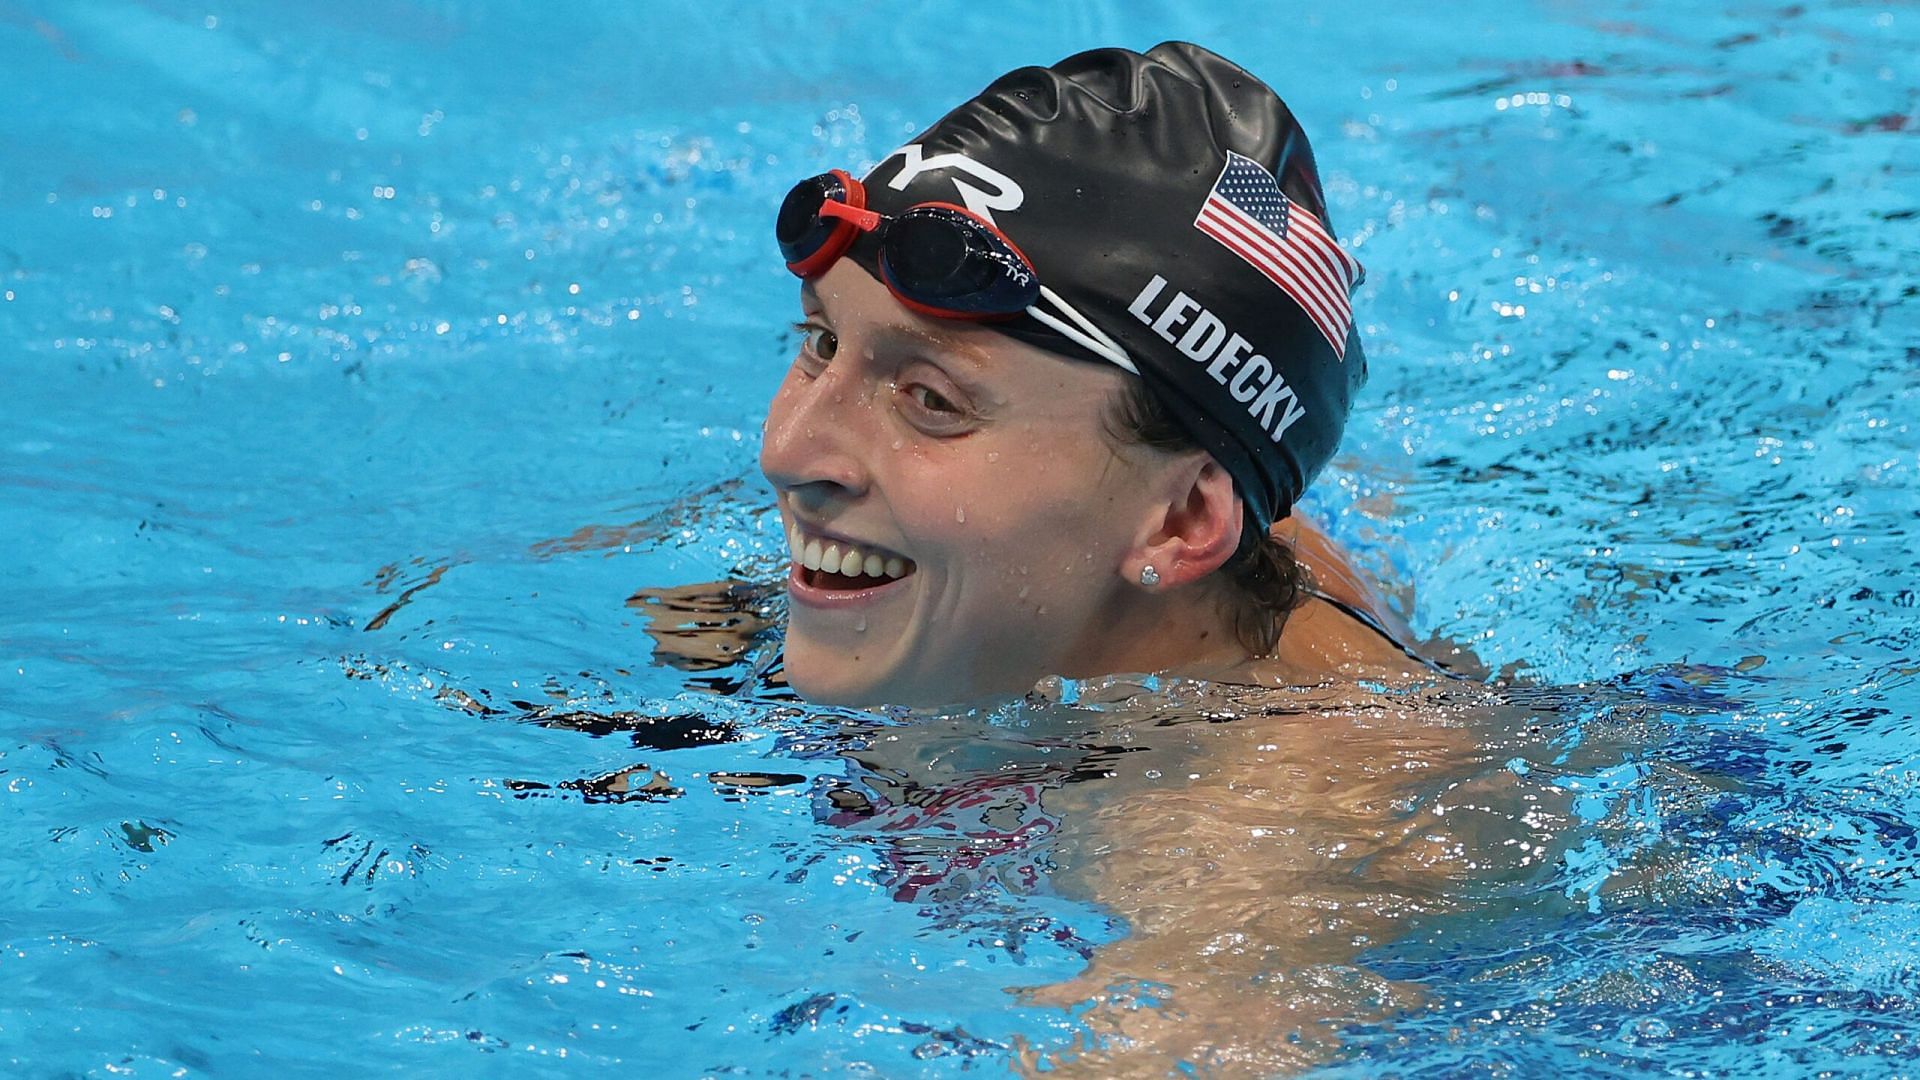 Katie Ledecky named in US Open Championships roster after missing World